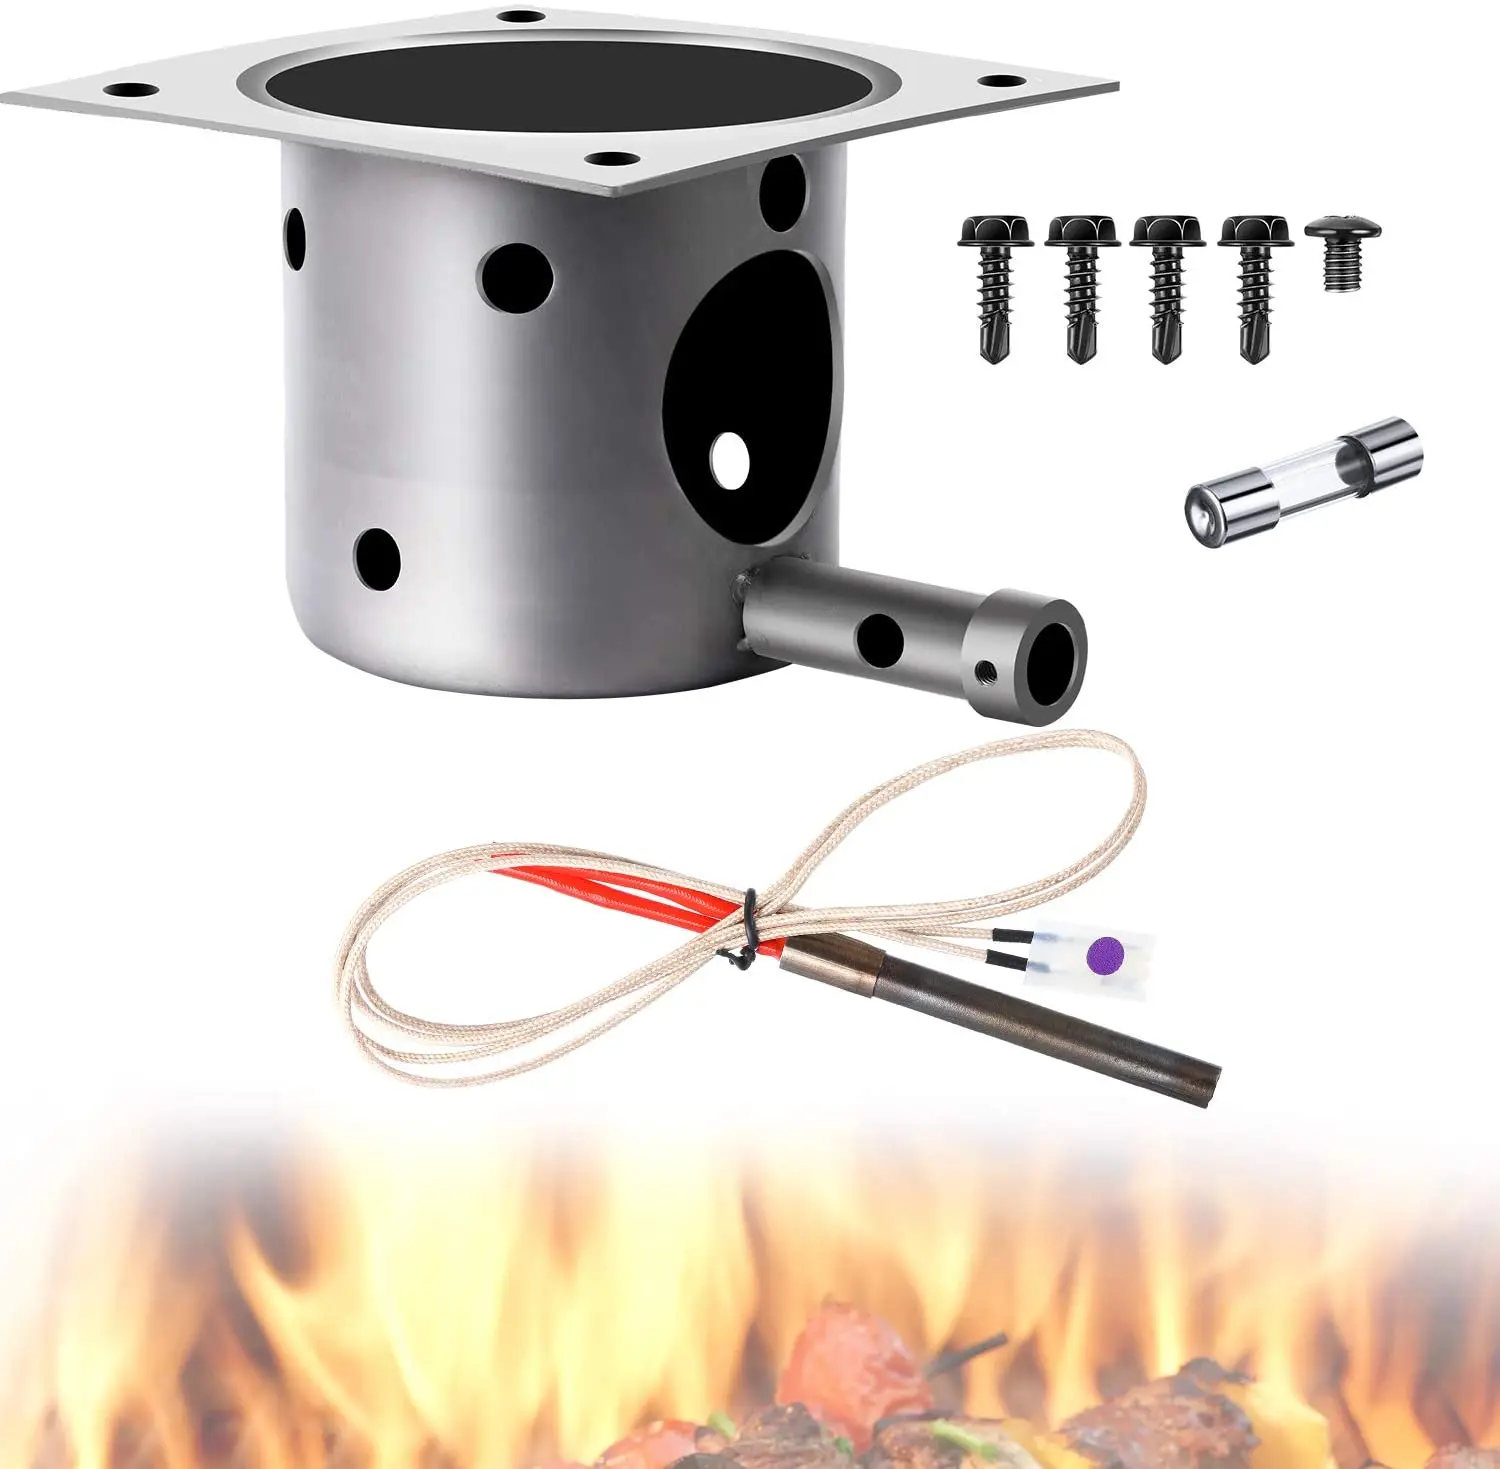 ZHOUWHJJ Fire Pot Burn Pot and Hot Rod Ignitor Kit Replacement Parts for Traeger and Pit boss Pellet Grill 